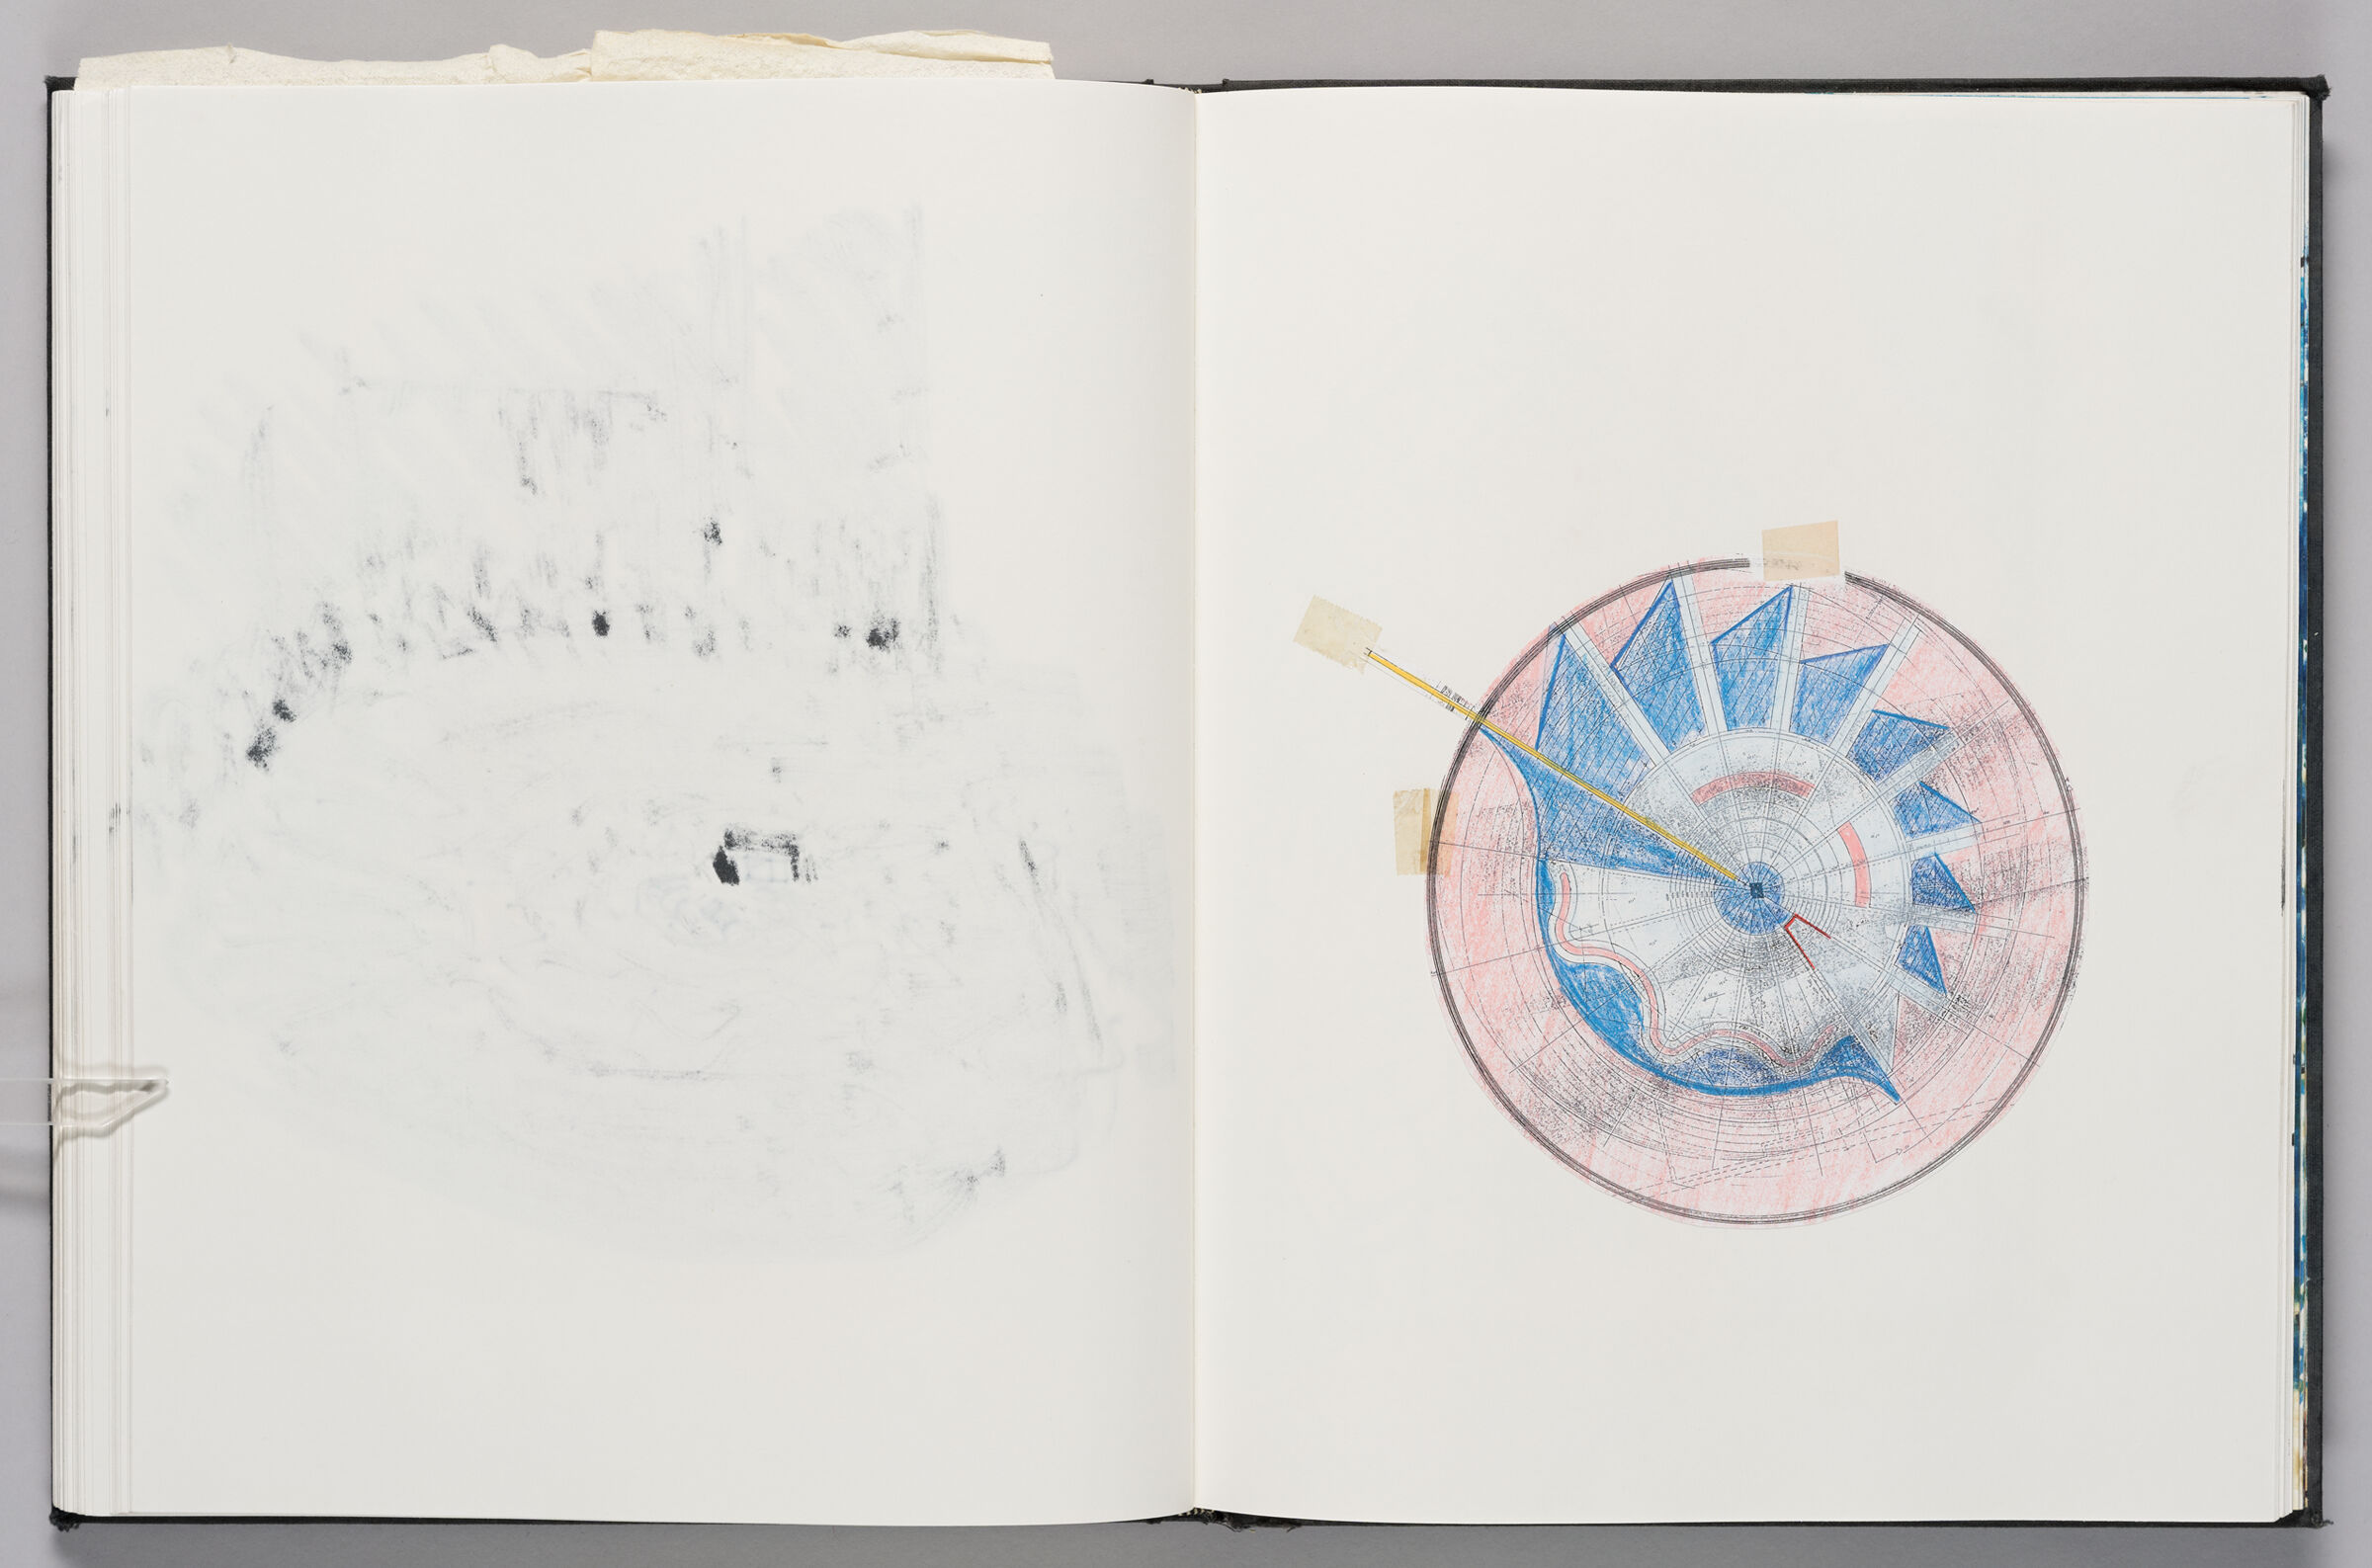 Untitled (Bleed-Through Of Previous Page, Left Page); Untitled (Adhered Sketch Of Media Park Fountain Aerial View, Right Page)